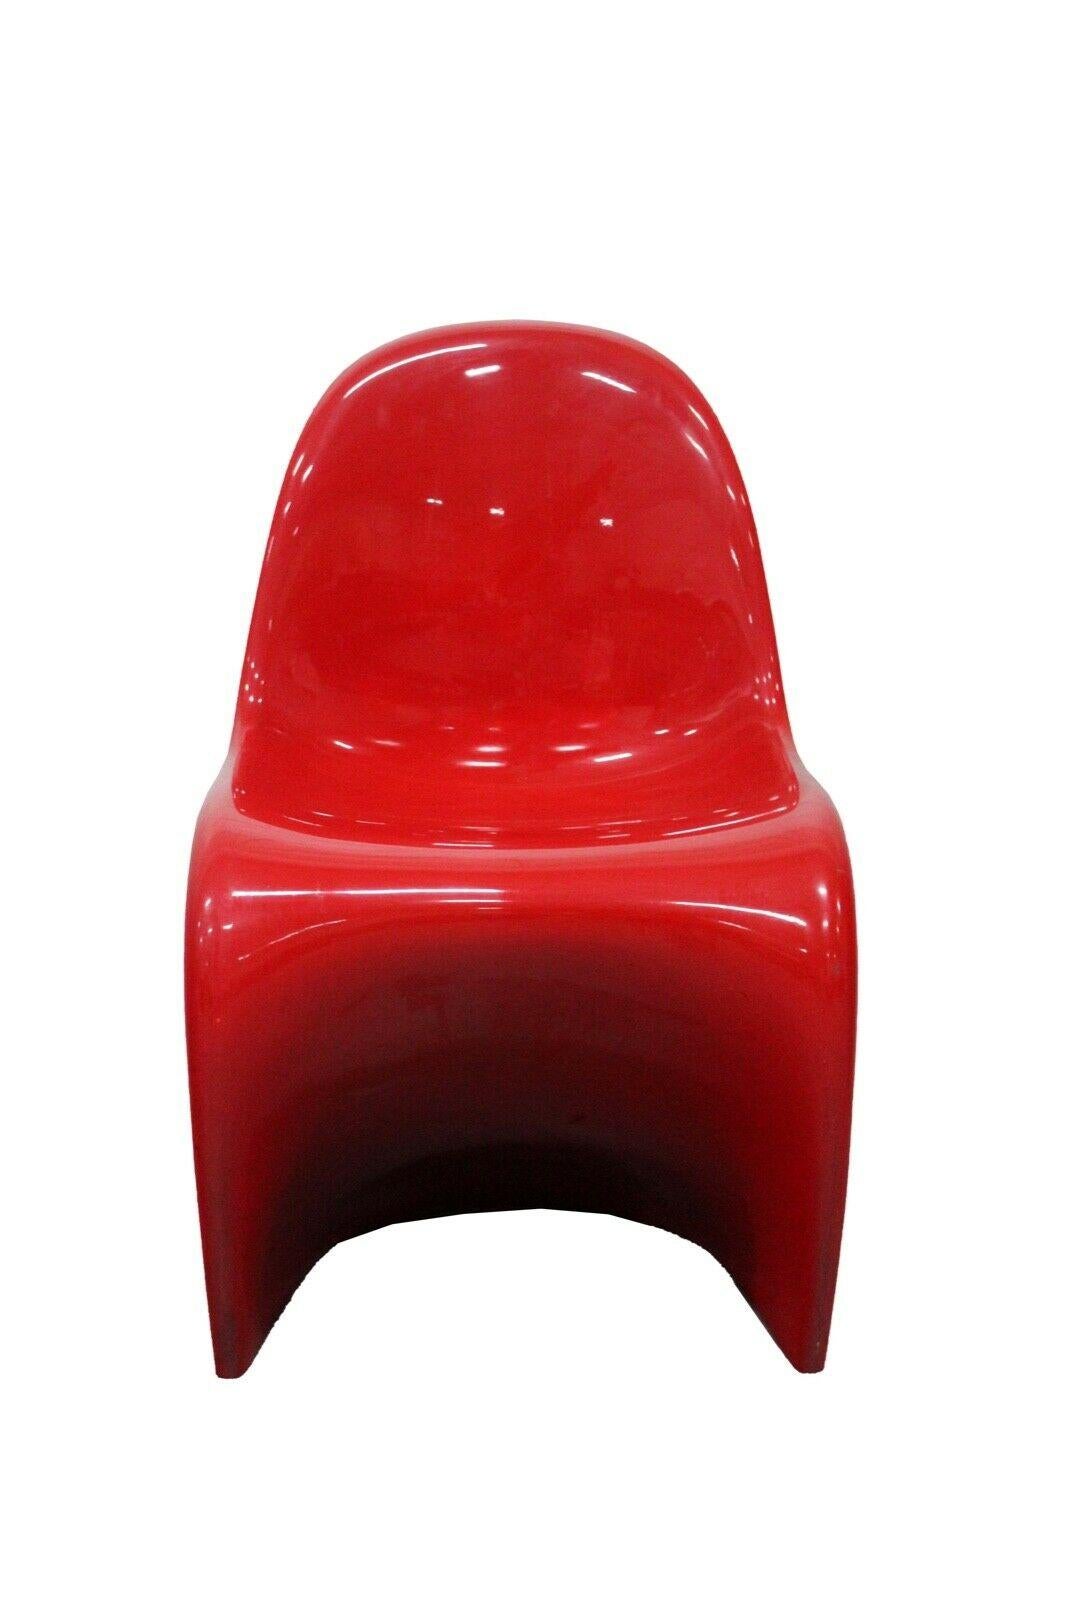 For your consideration is this iconic bright red Vitra stackable chair designed by Verner Panton. Dimensions: 19w x 21d x 32h Seat Height: 18